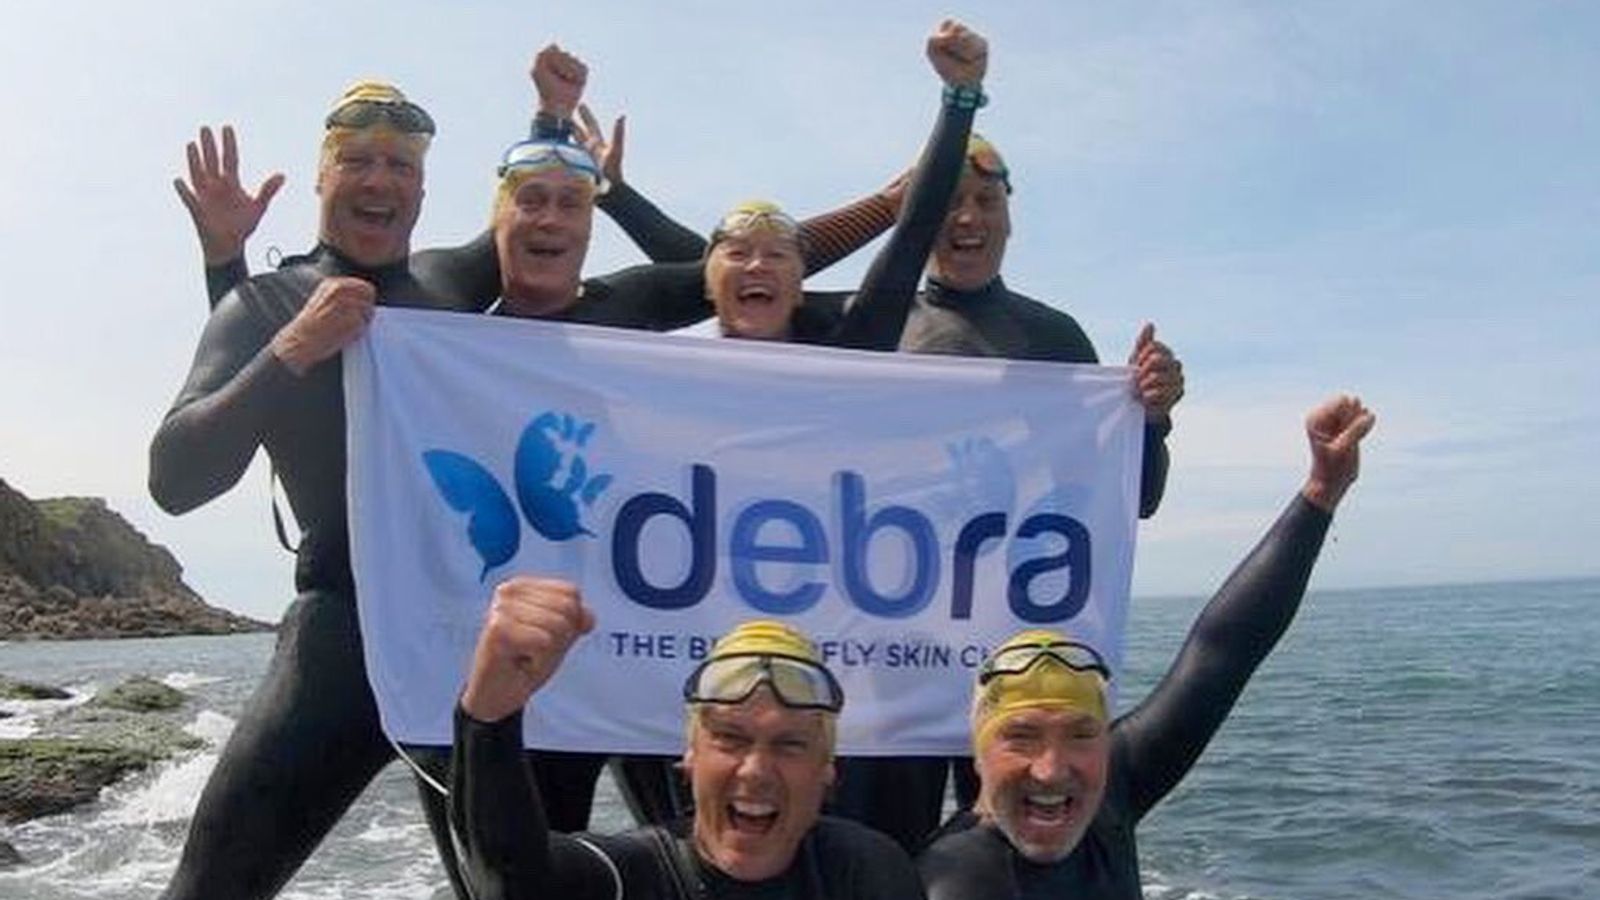 Graeme Souness raises more than £1m for Debra UK charity after completing Channel swim | UK News